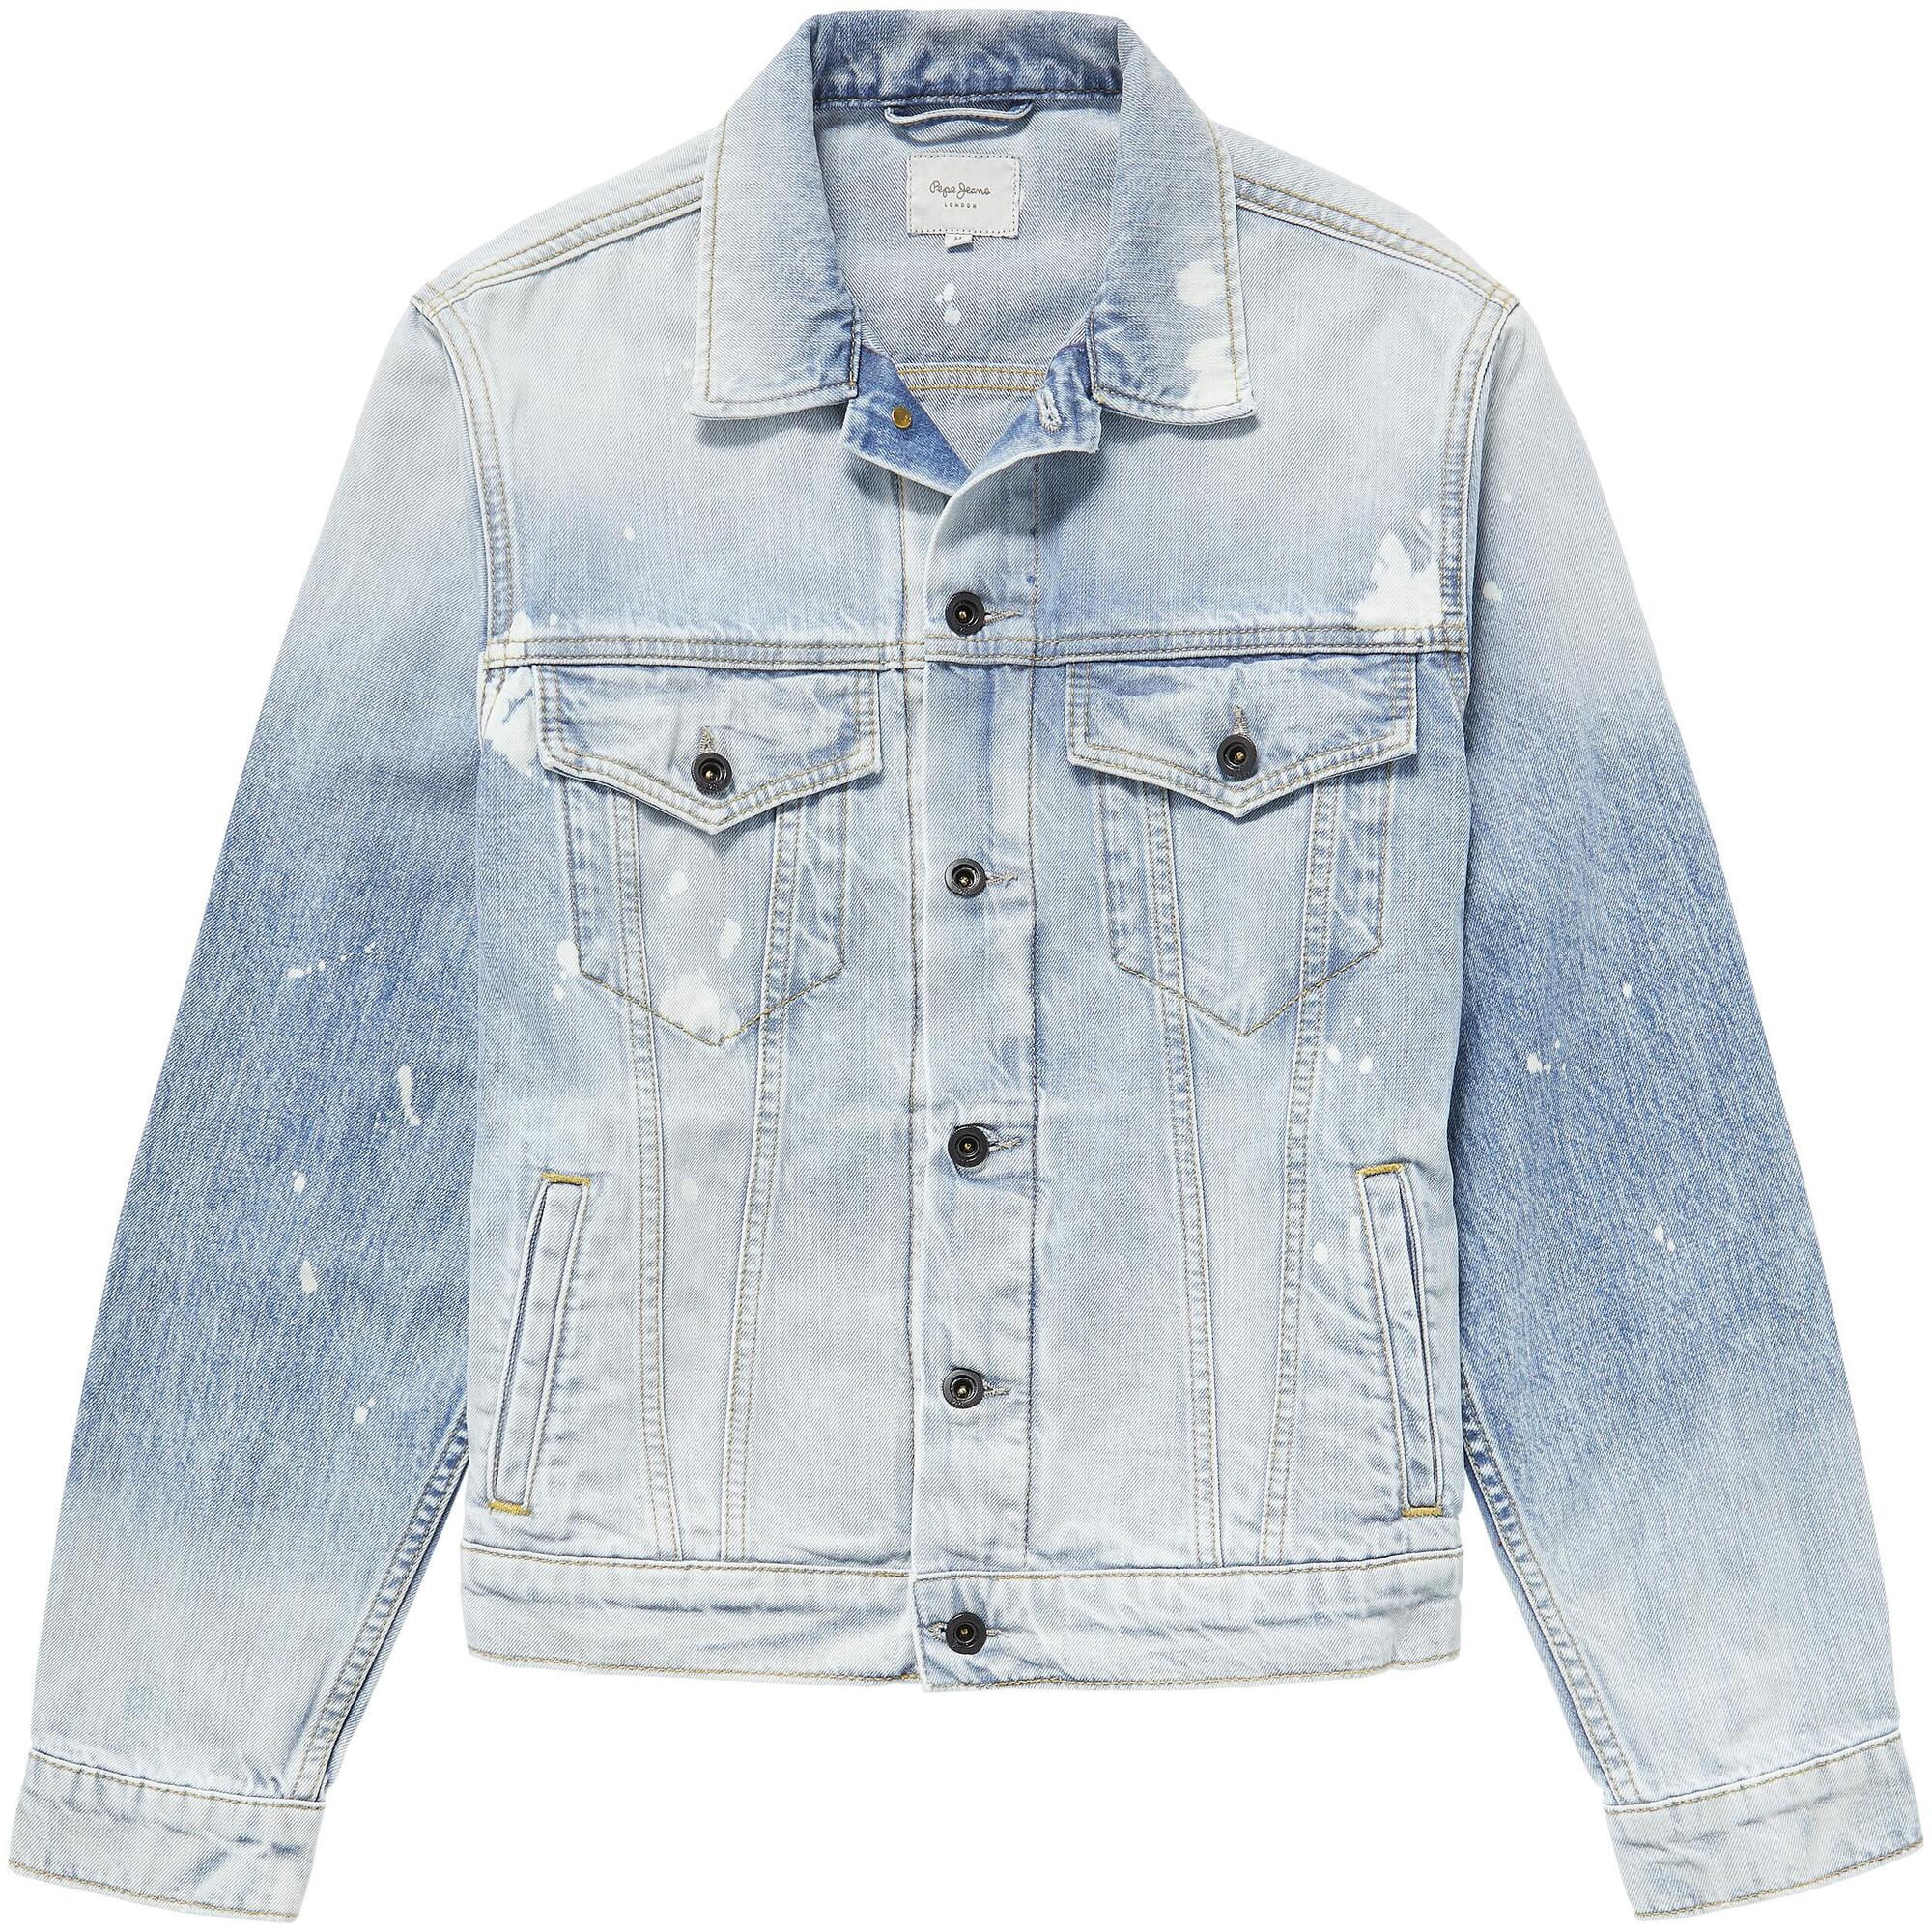 Pepe Jeans London giacca jeans